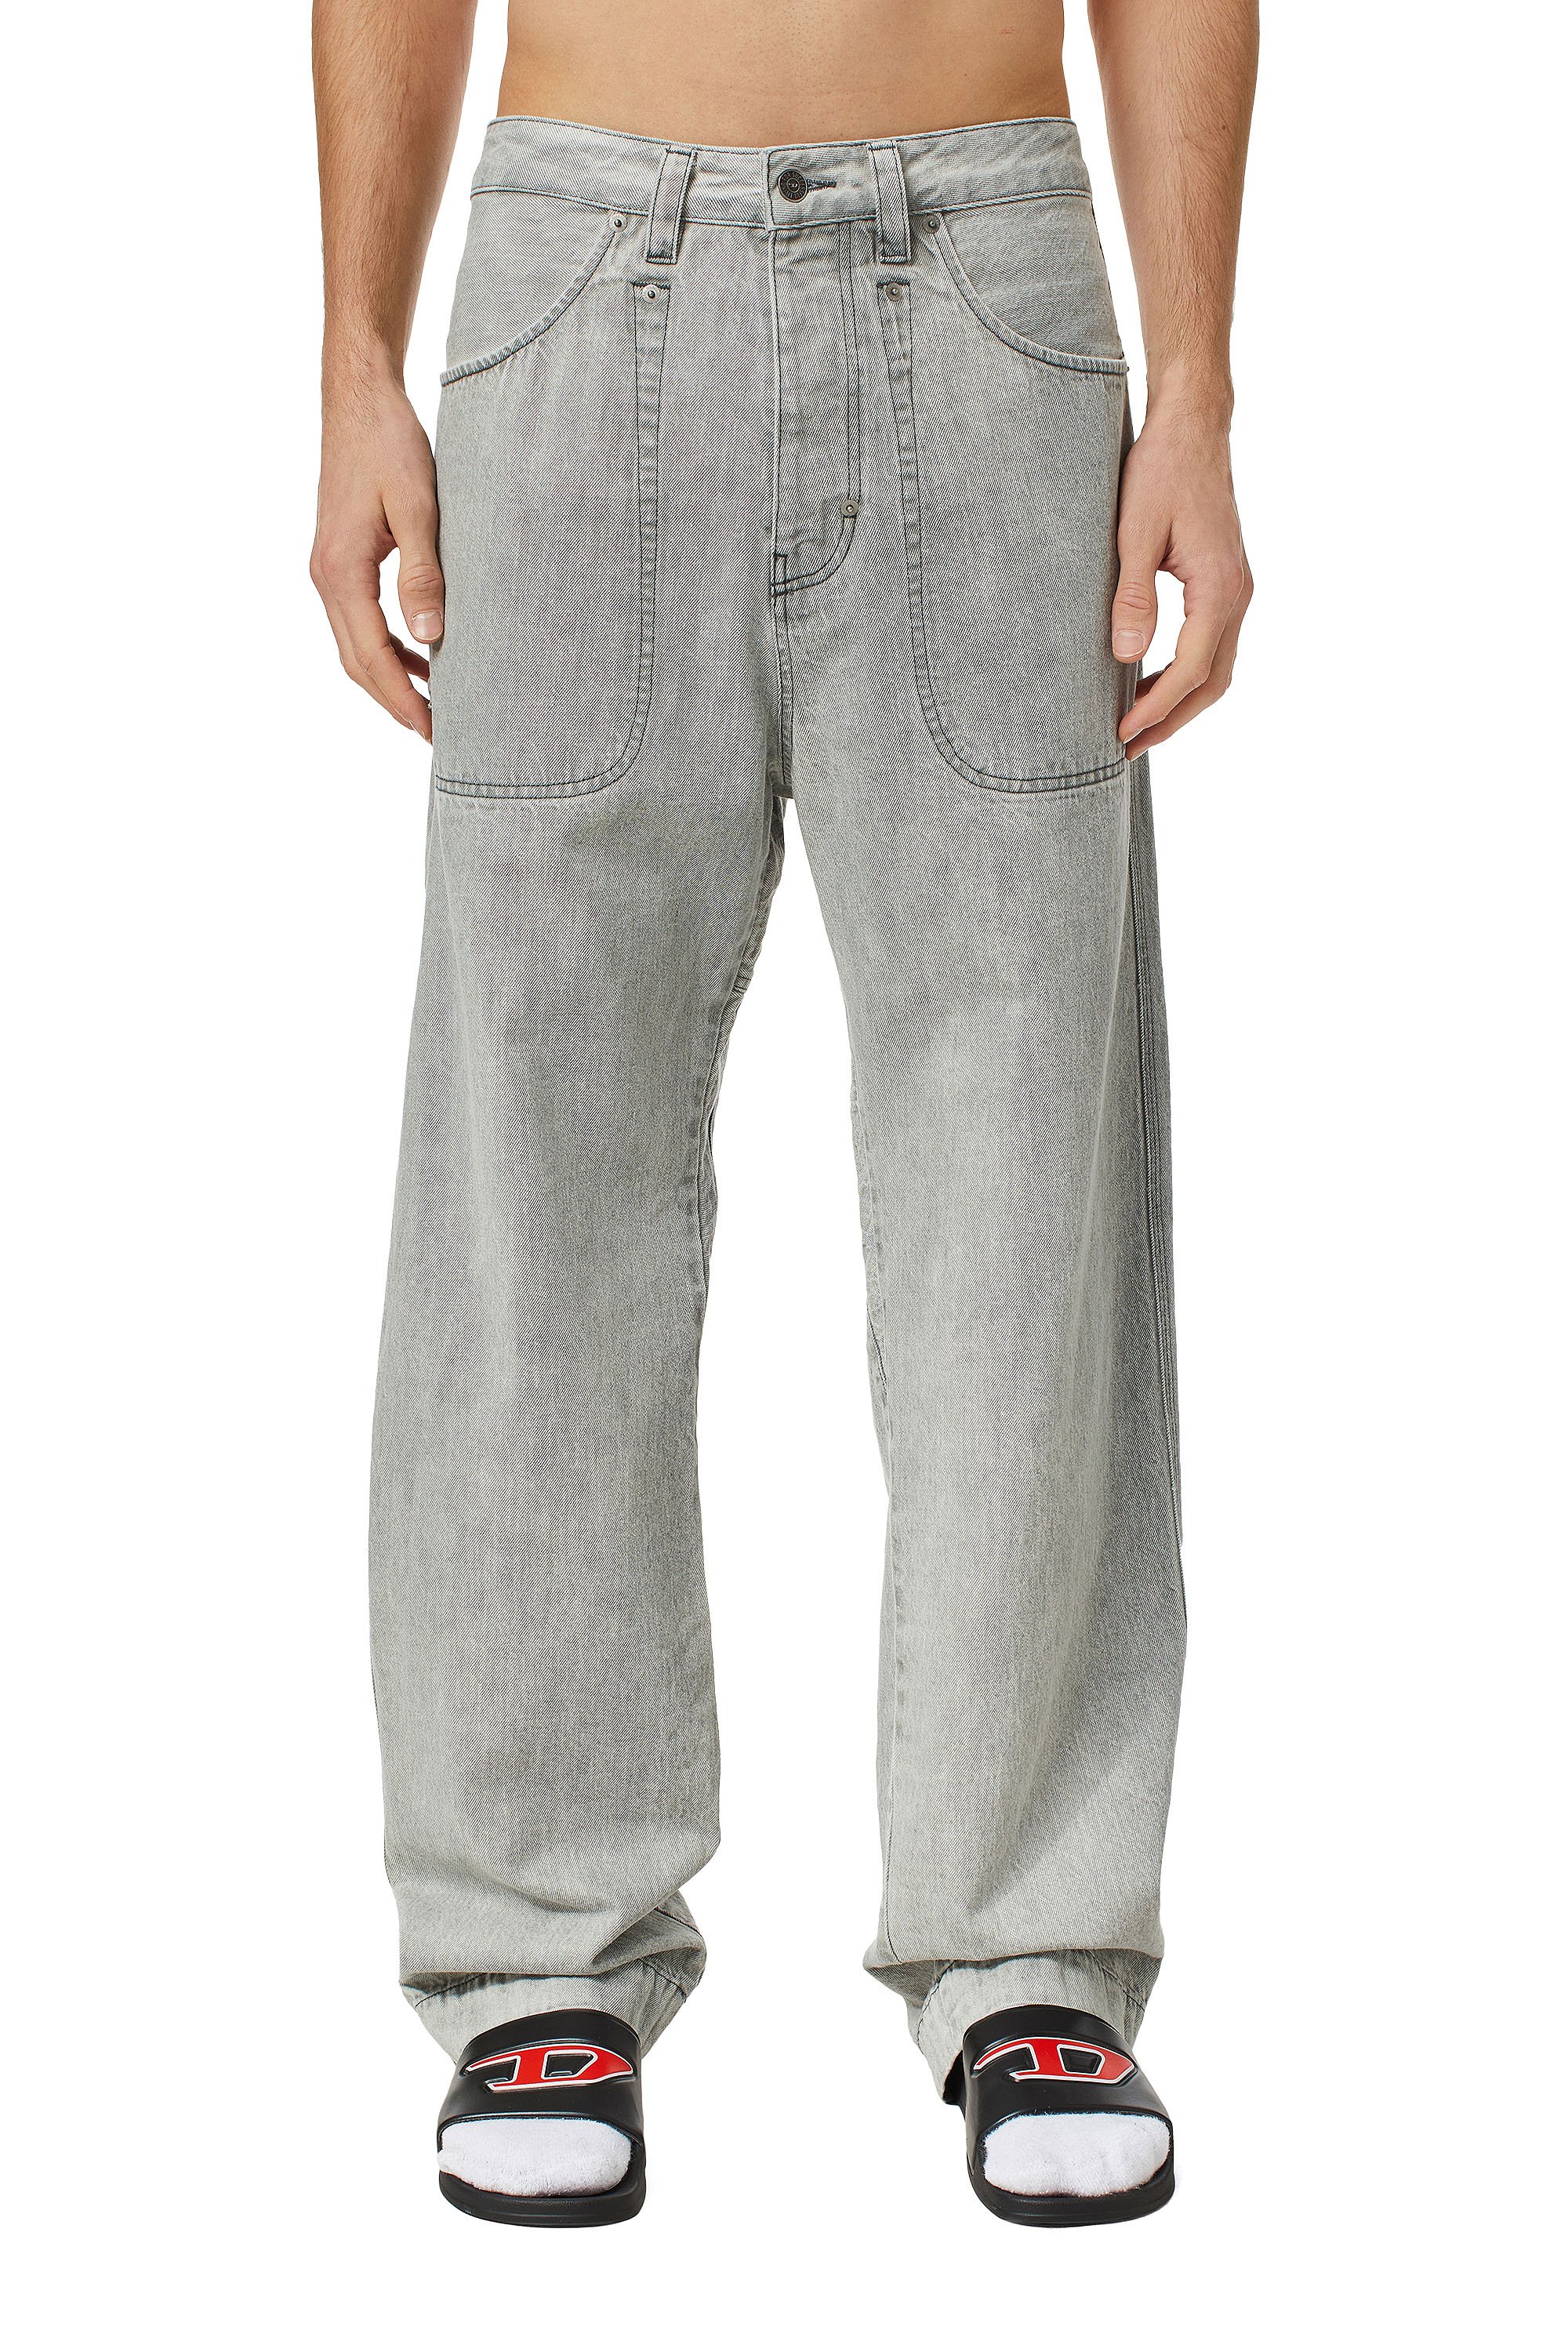 D-Fransy 0ICVH Straight Jeans, Grey - Jeans